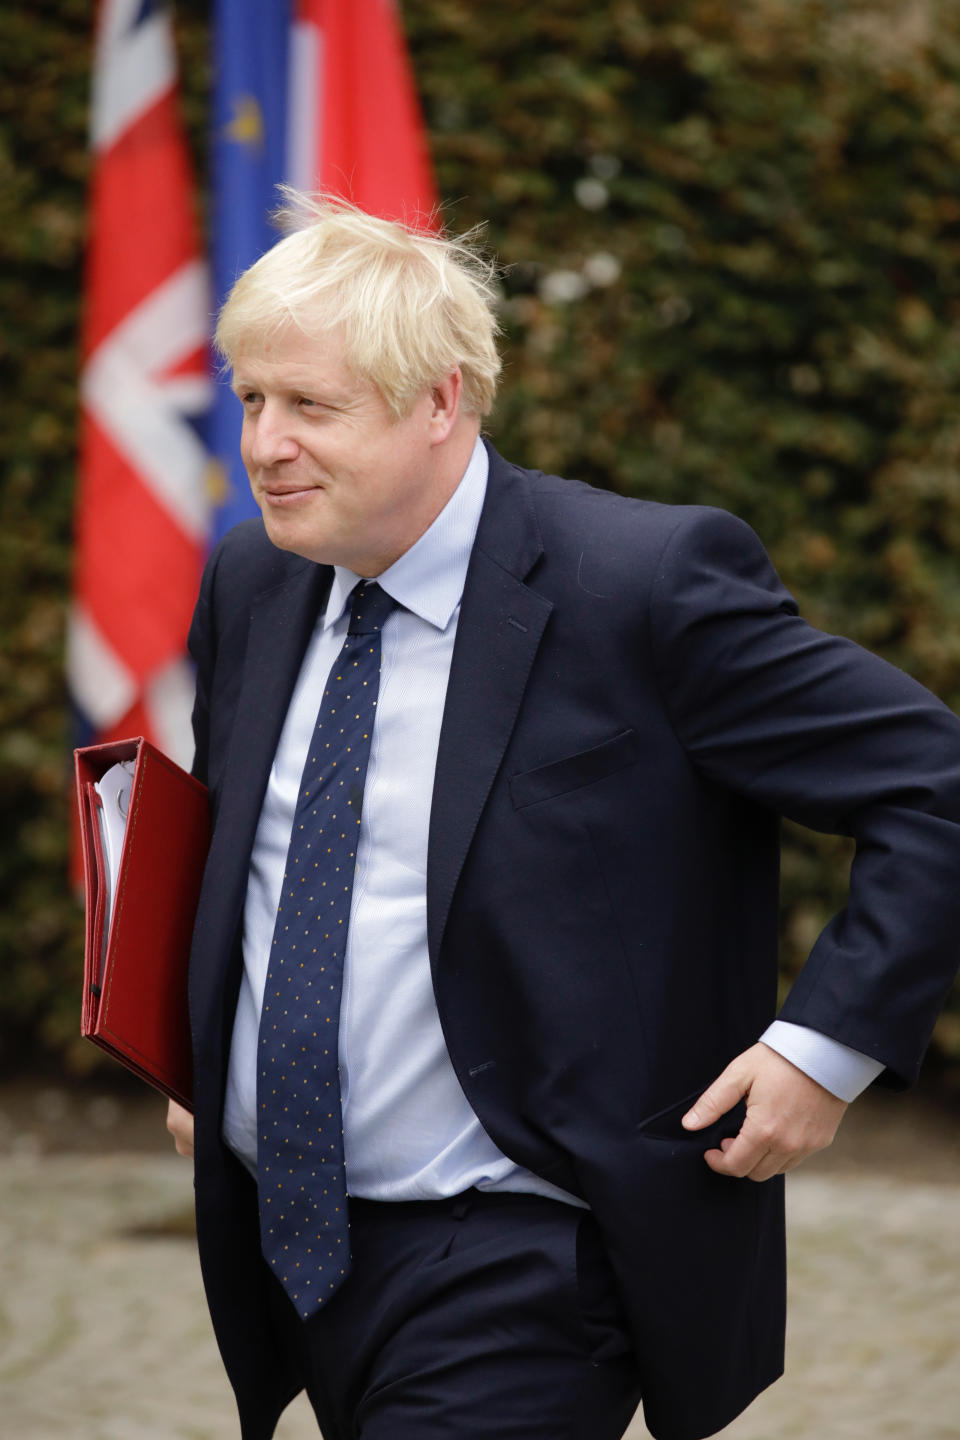 British Prime Minister Boris Johnson walks by flags after a meeting with Luxembourg's Prime Minister Xavier Bettel at the prime ministers office in Luxembourg, Monday, Sept. 16, 2019. (AP Photo/Olivier Matthys)